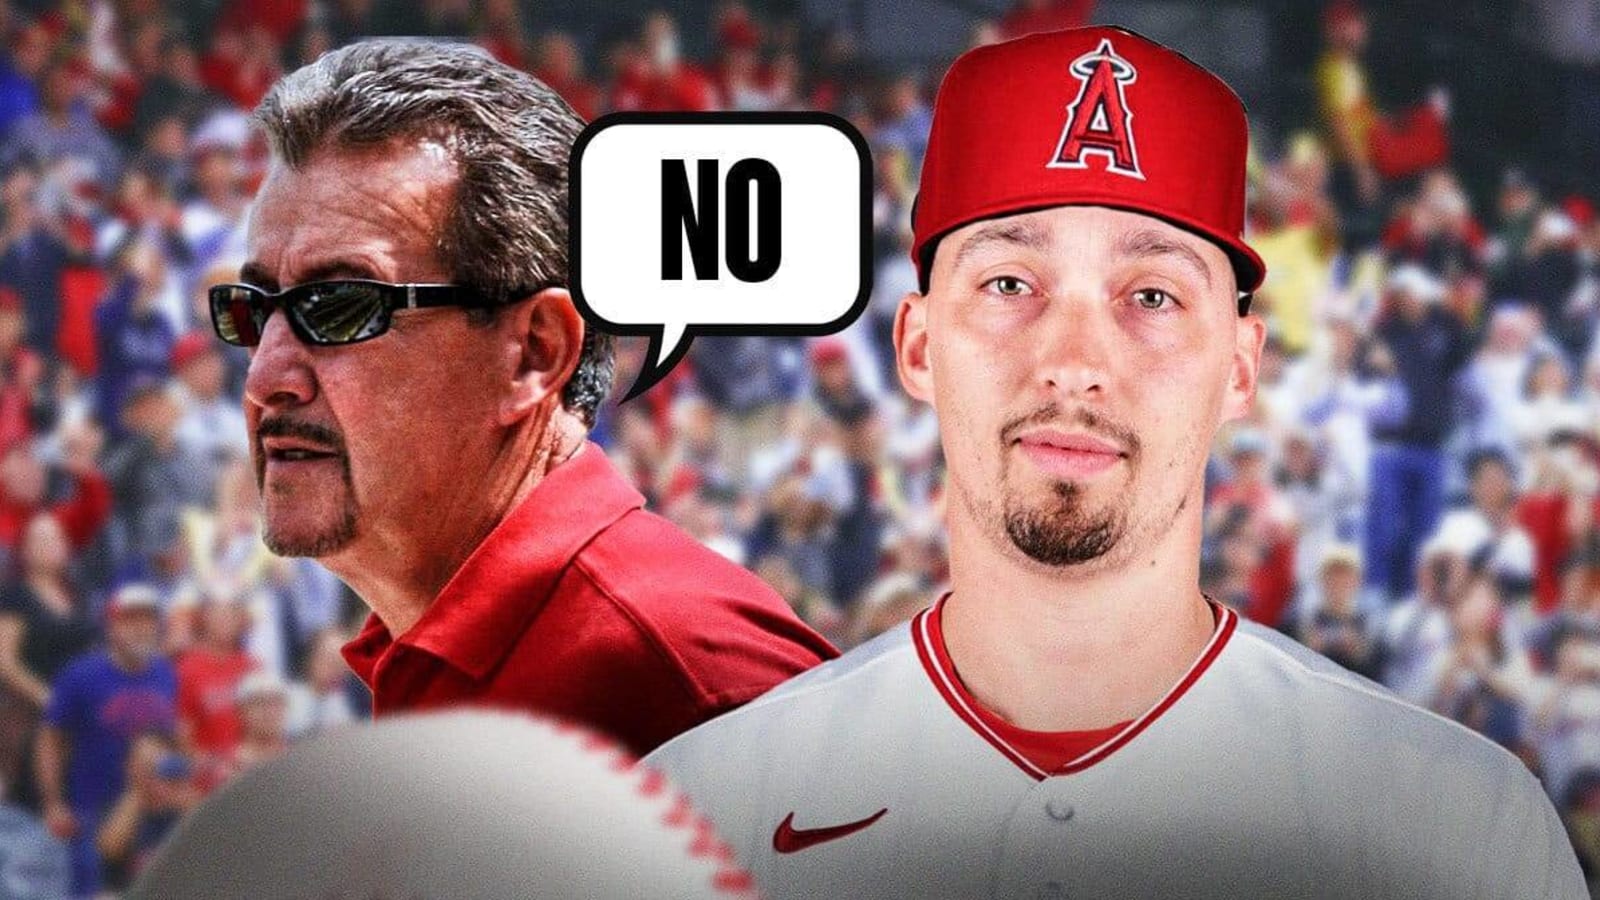  Angels owner saying ‘no’ to Blake Snell signing